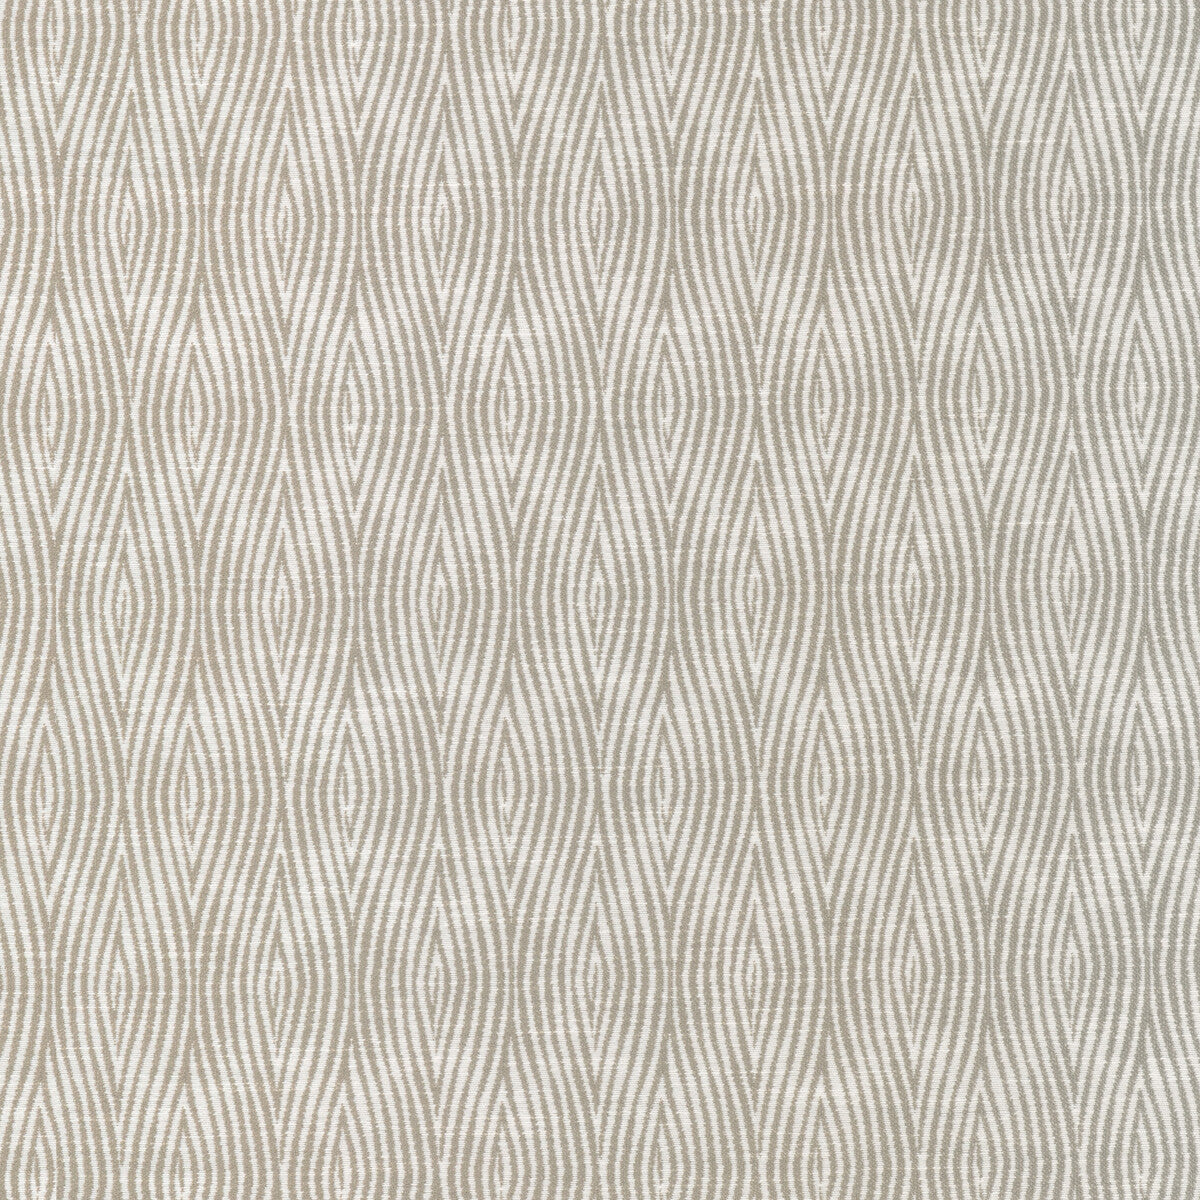 Vertical Motion fabric in stone color - pattern 37059.106.0 - by Kravet Design in the Thom Filicia Latitude collection